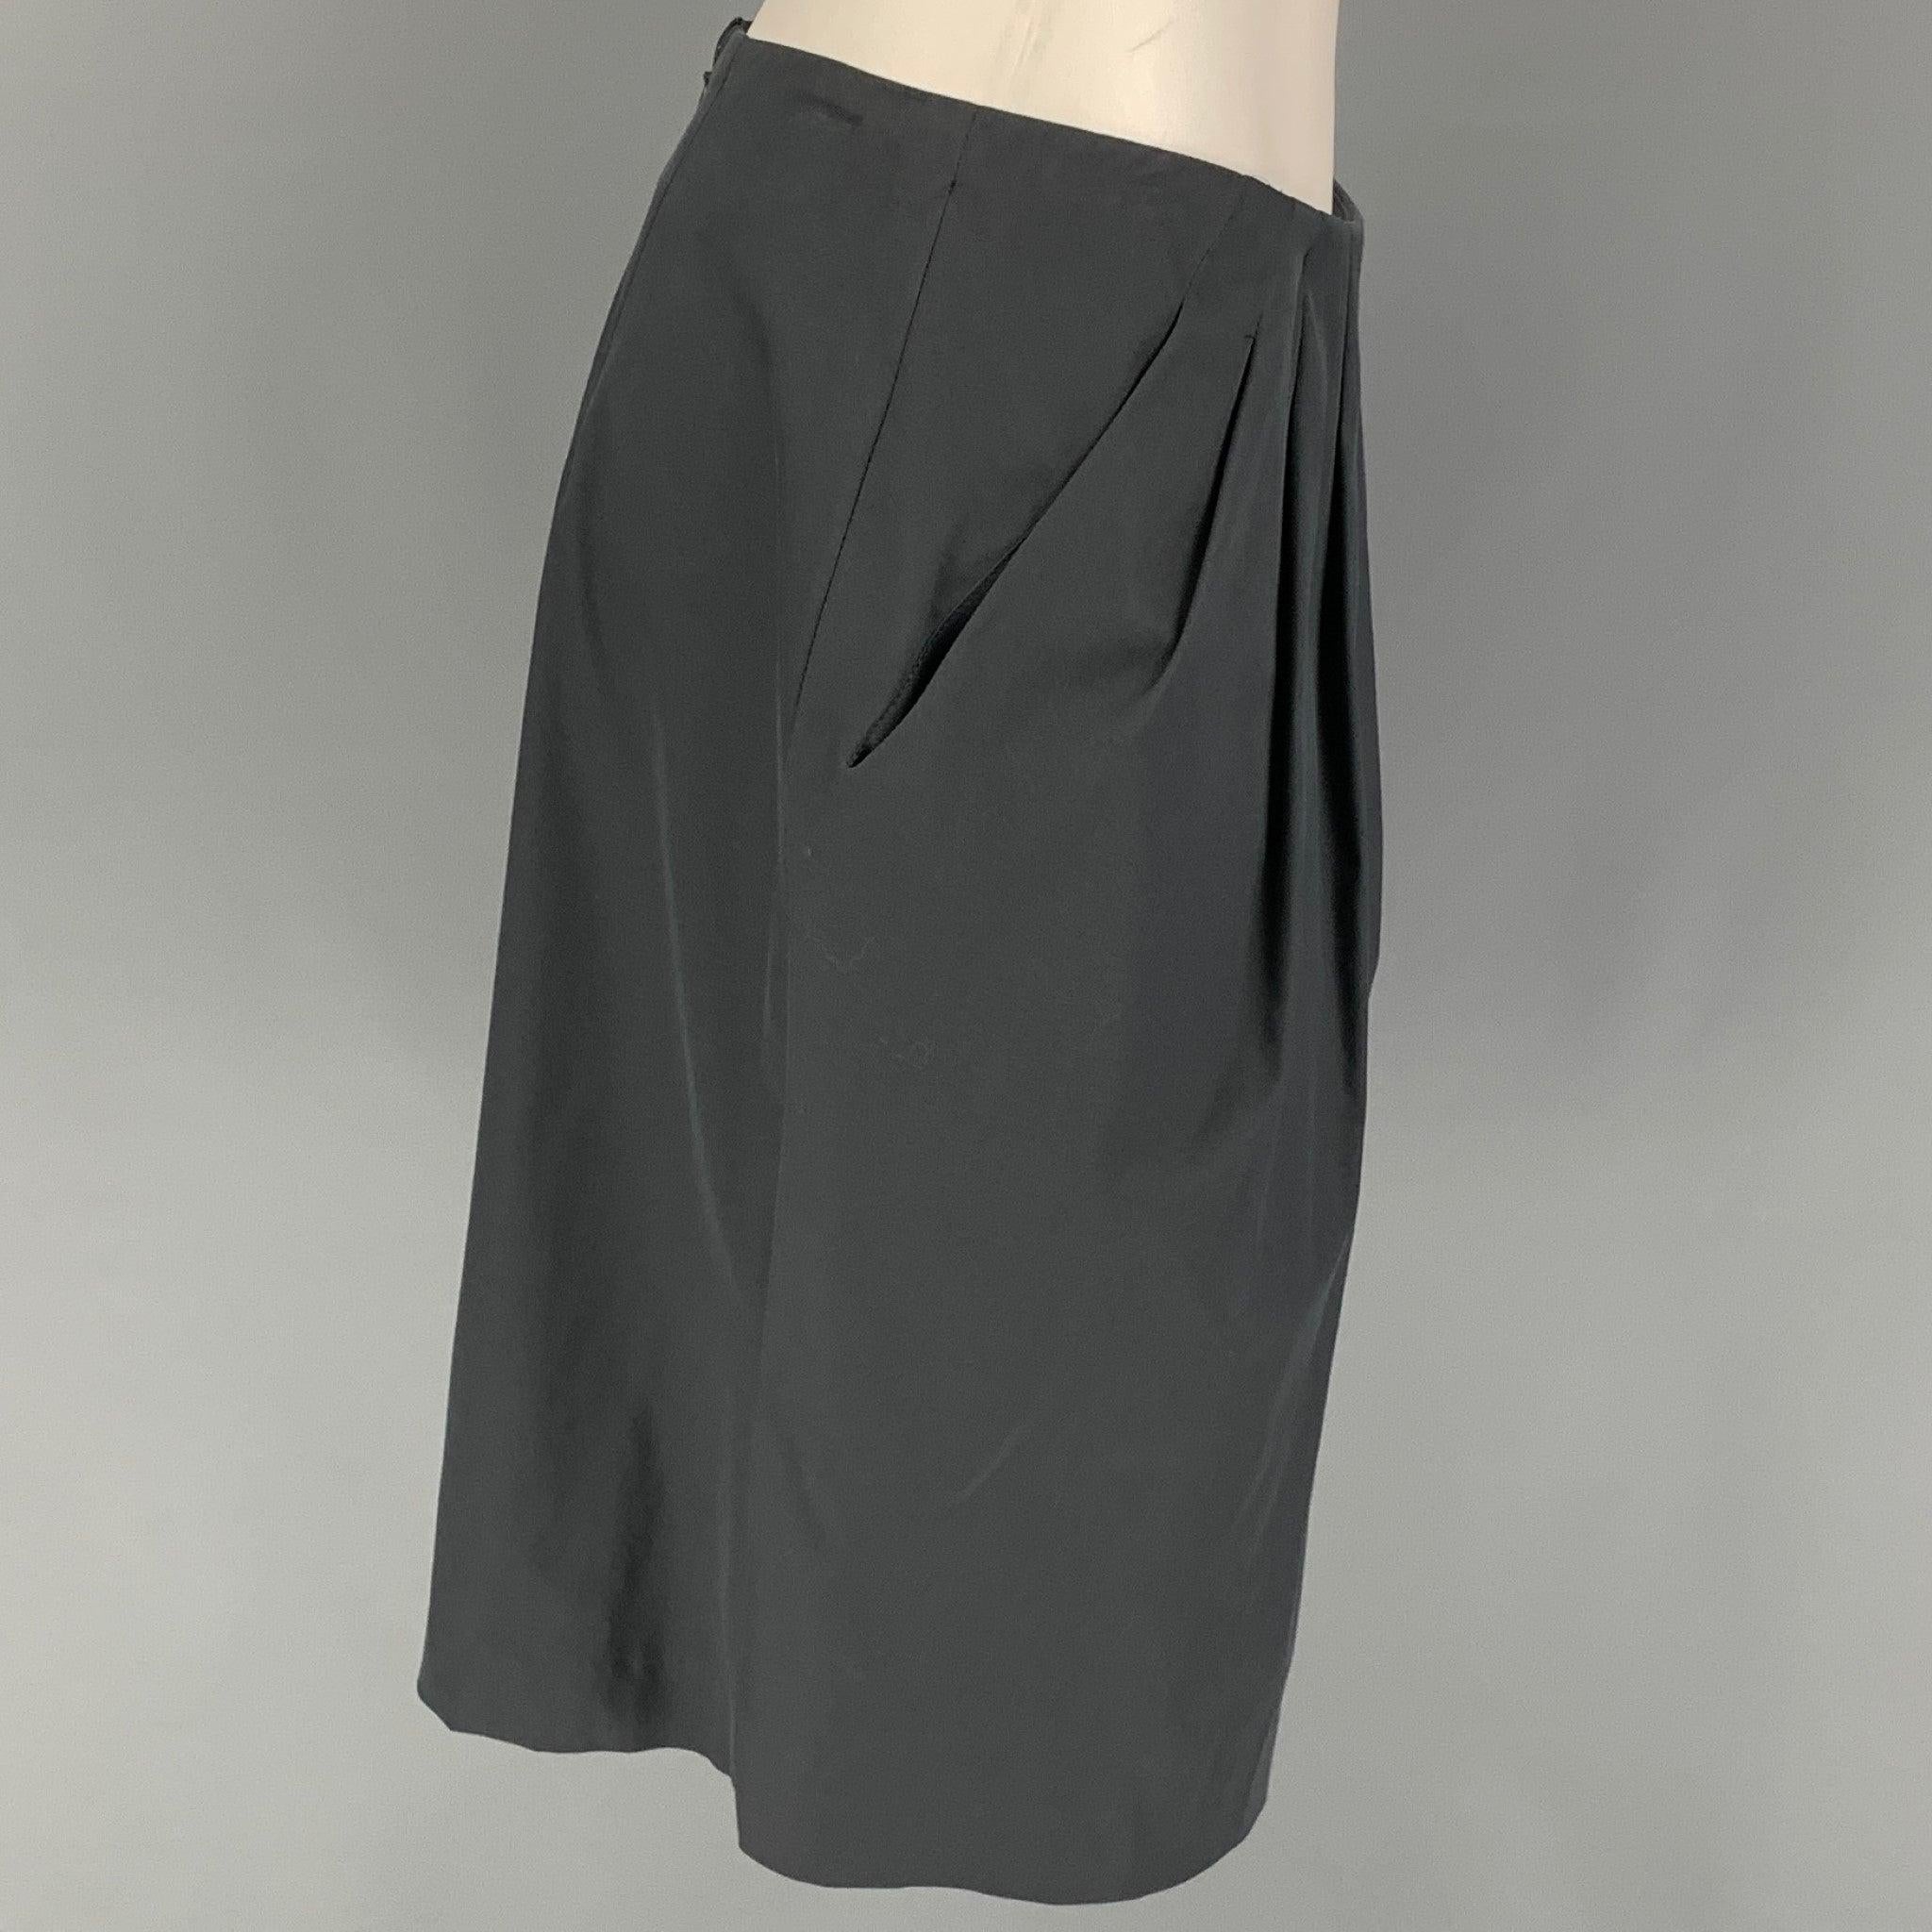 ETRO skirt comes in a slate cotton featuring a pleated style, slit pockets, and a back zip up closure.
New with tags.
 

Marked:   42 

Measurements: 
  Waist: 28 inches  Hip: 42 inches  Length: 22 inches 
  
  
 
Reference: 121714
Category: